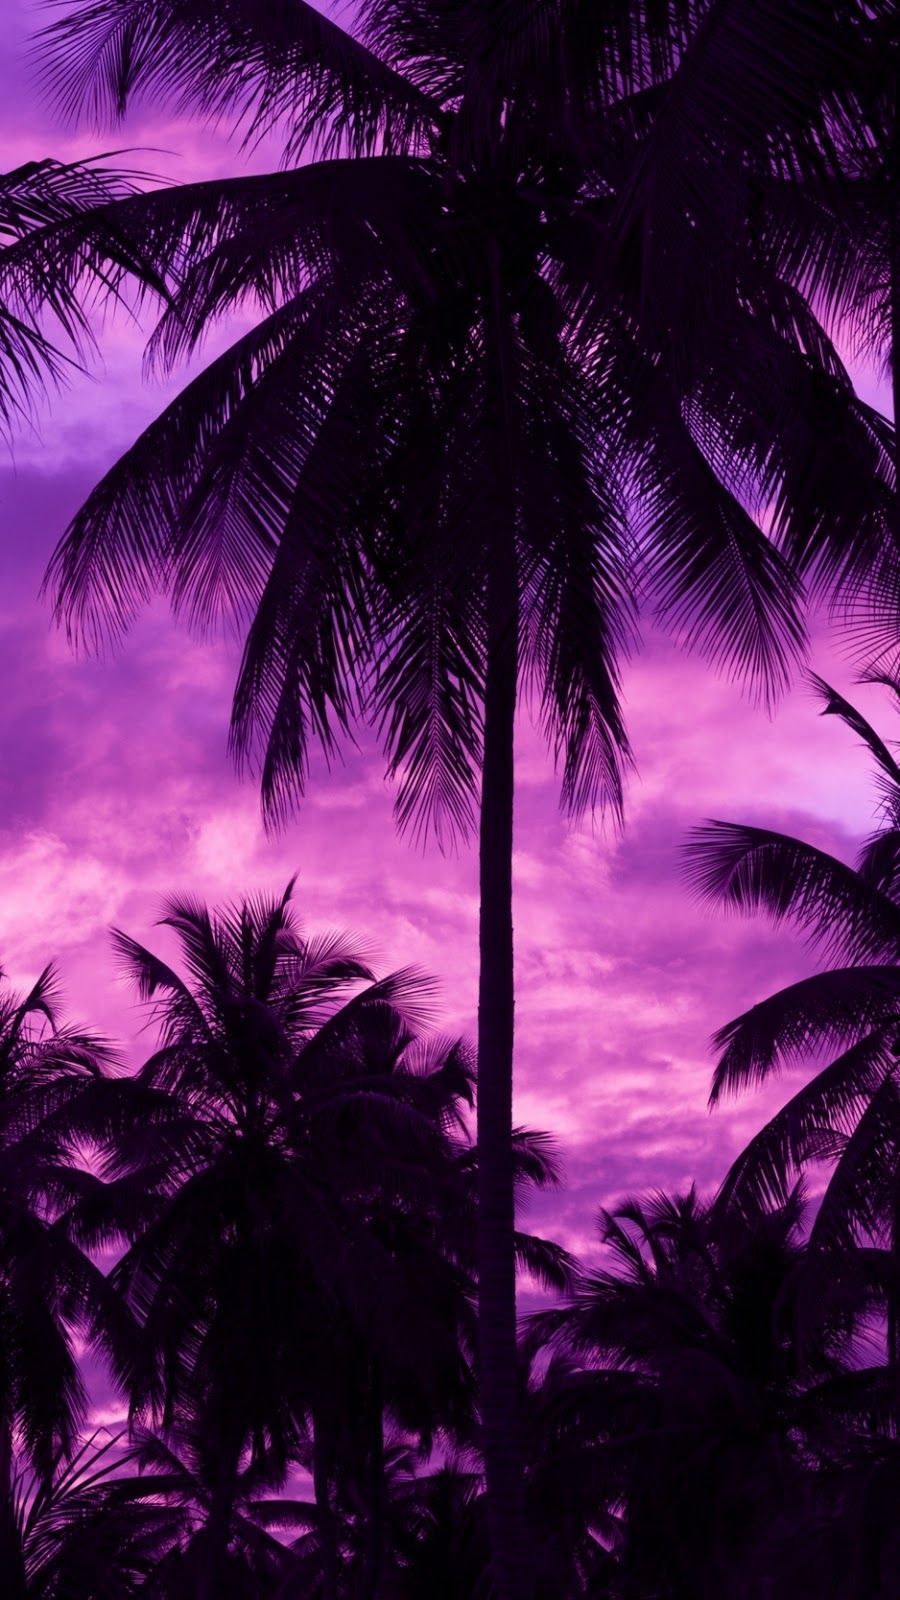 Violet Palms. Palm wallpaper, Tree wallpaper iphone, Palm tree silhouette